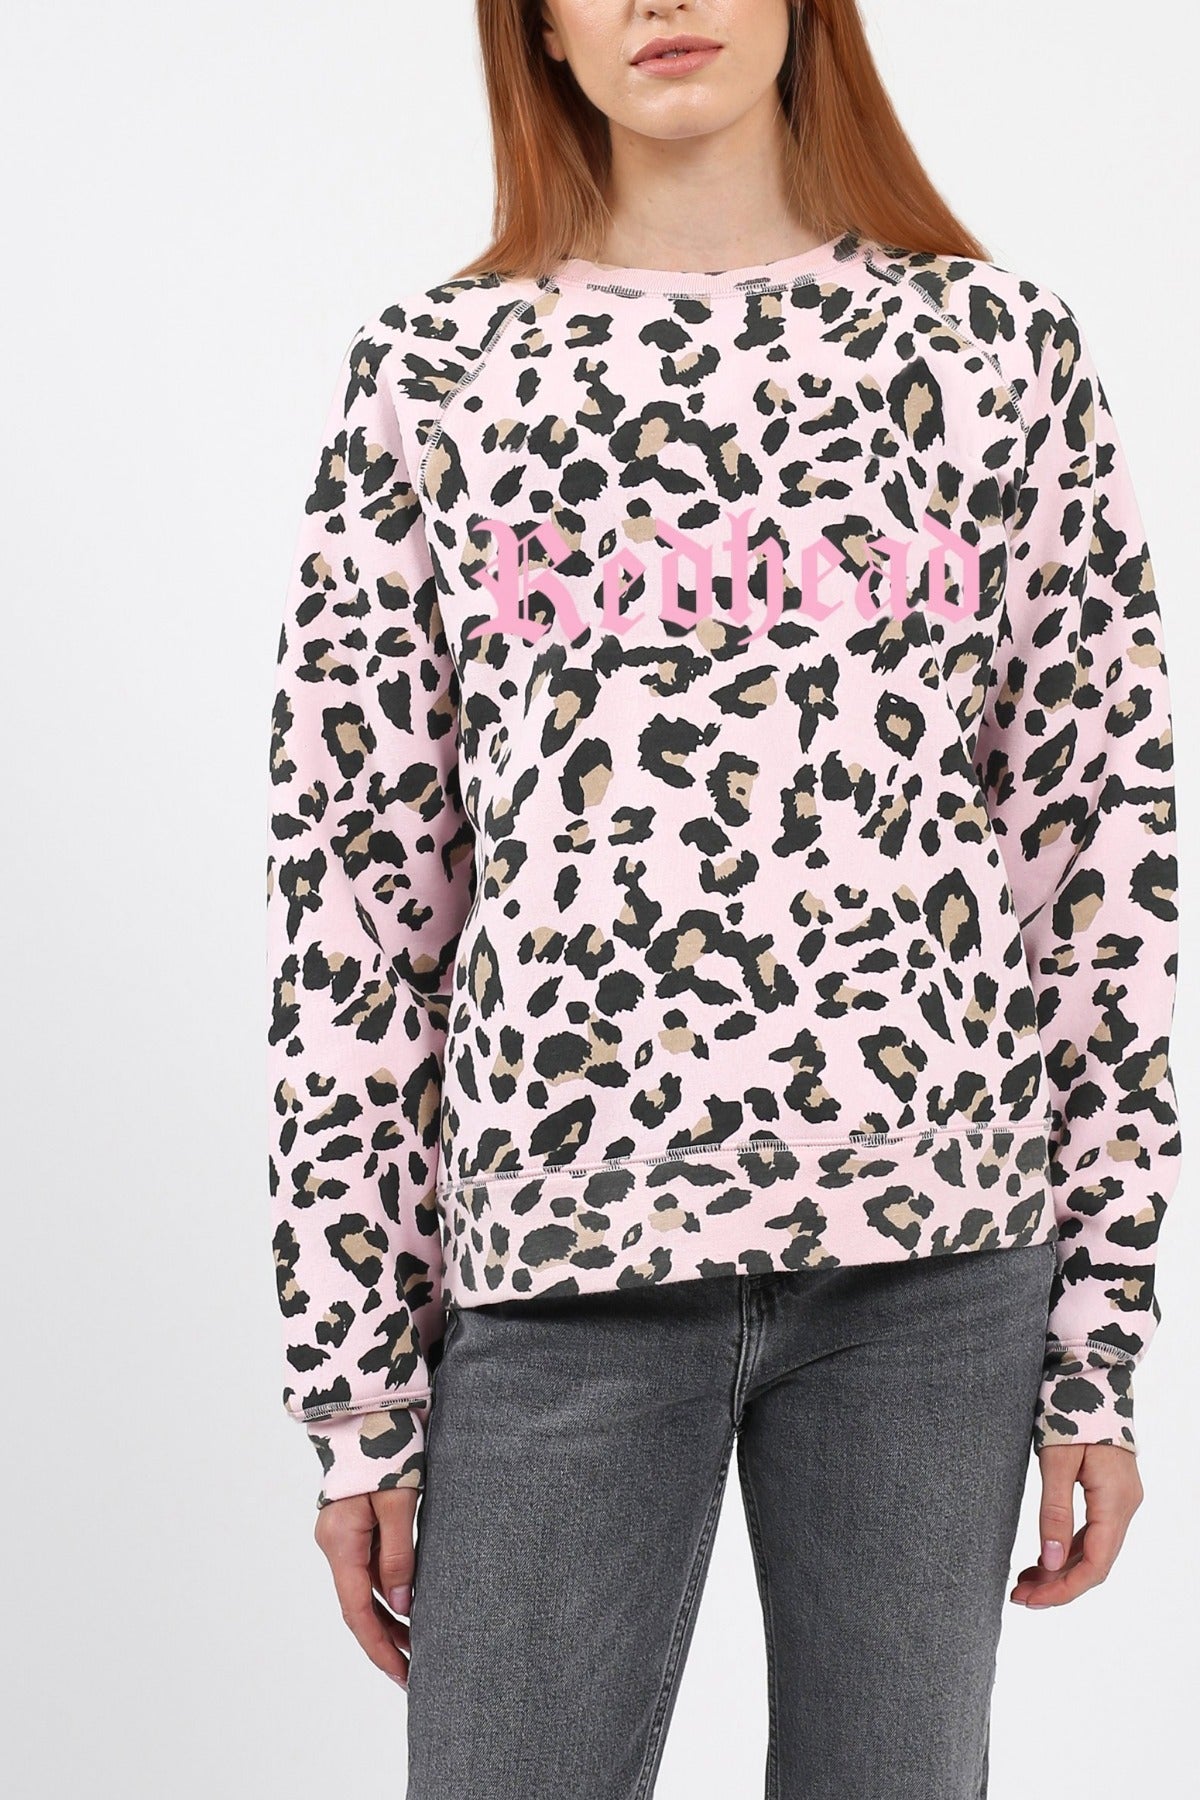 The "REDHEAD" Pink Leopard Middle Sister Crew Neck Sweatshirt